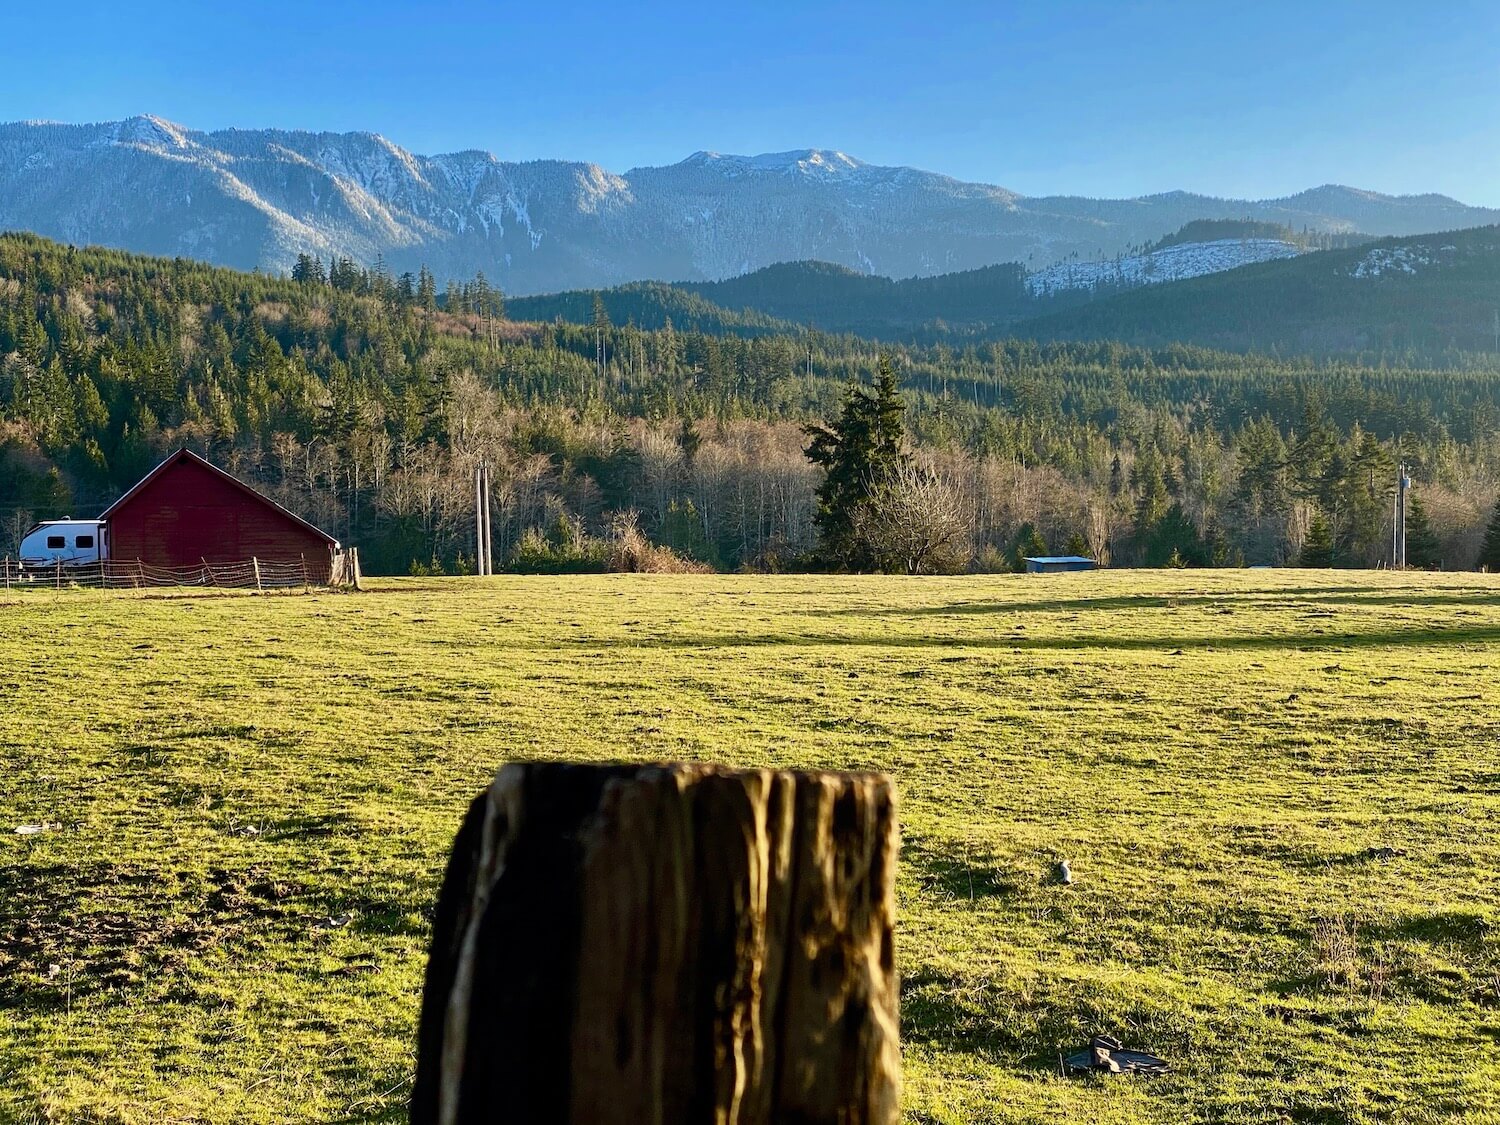 The rolling foothills near Joyce Washignton lead up to the lightly snow covered Olympic Mountains. In the foreground is an out of focus fence post and the pasture is bright lime green with a red barn in the distance.